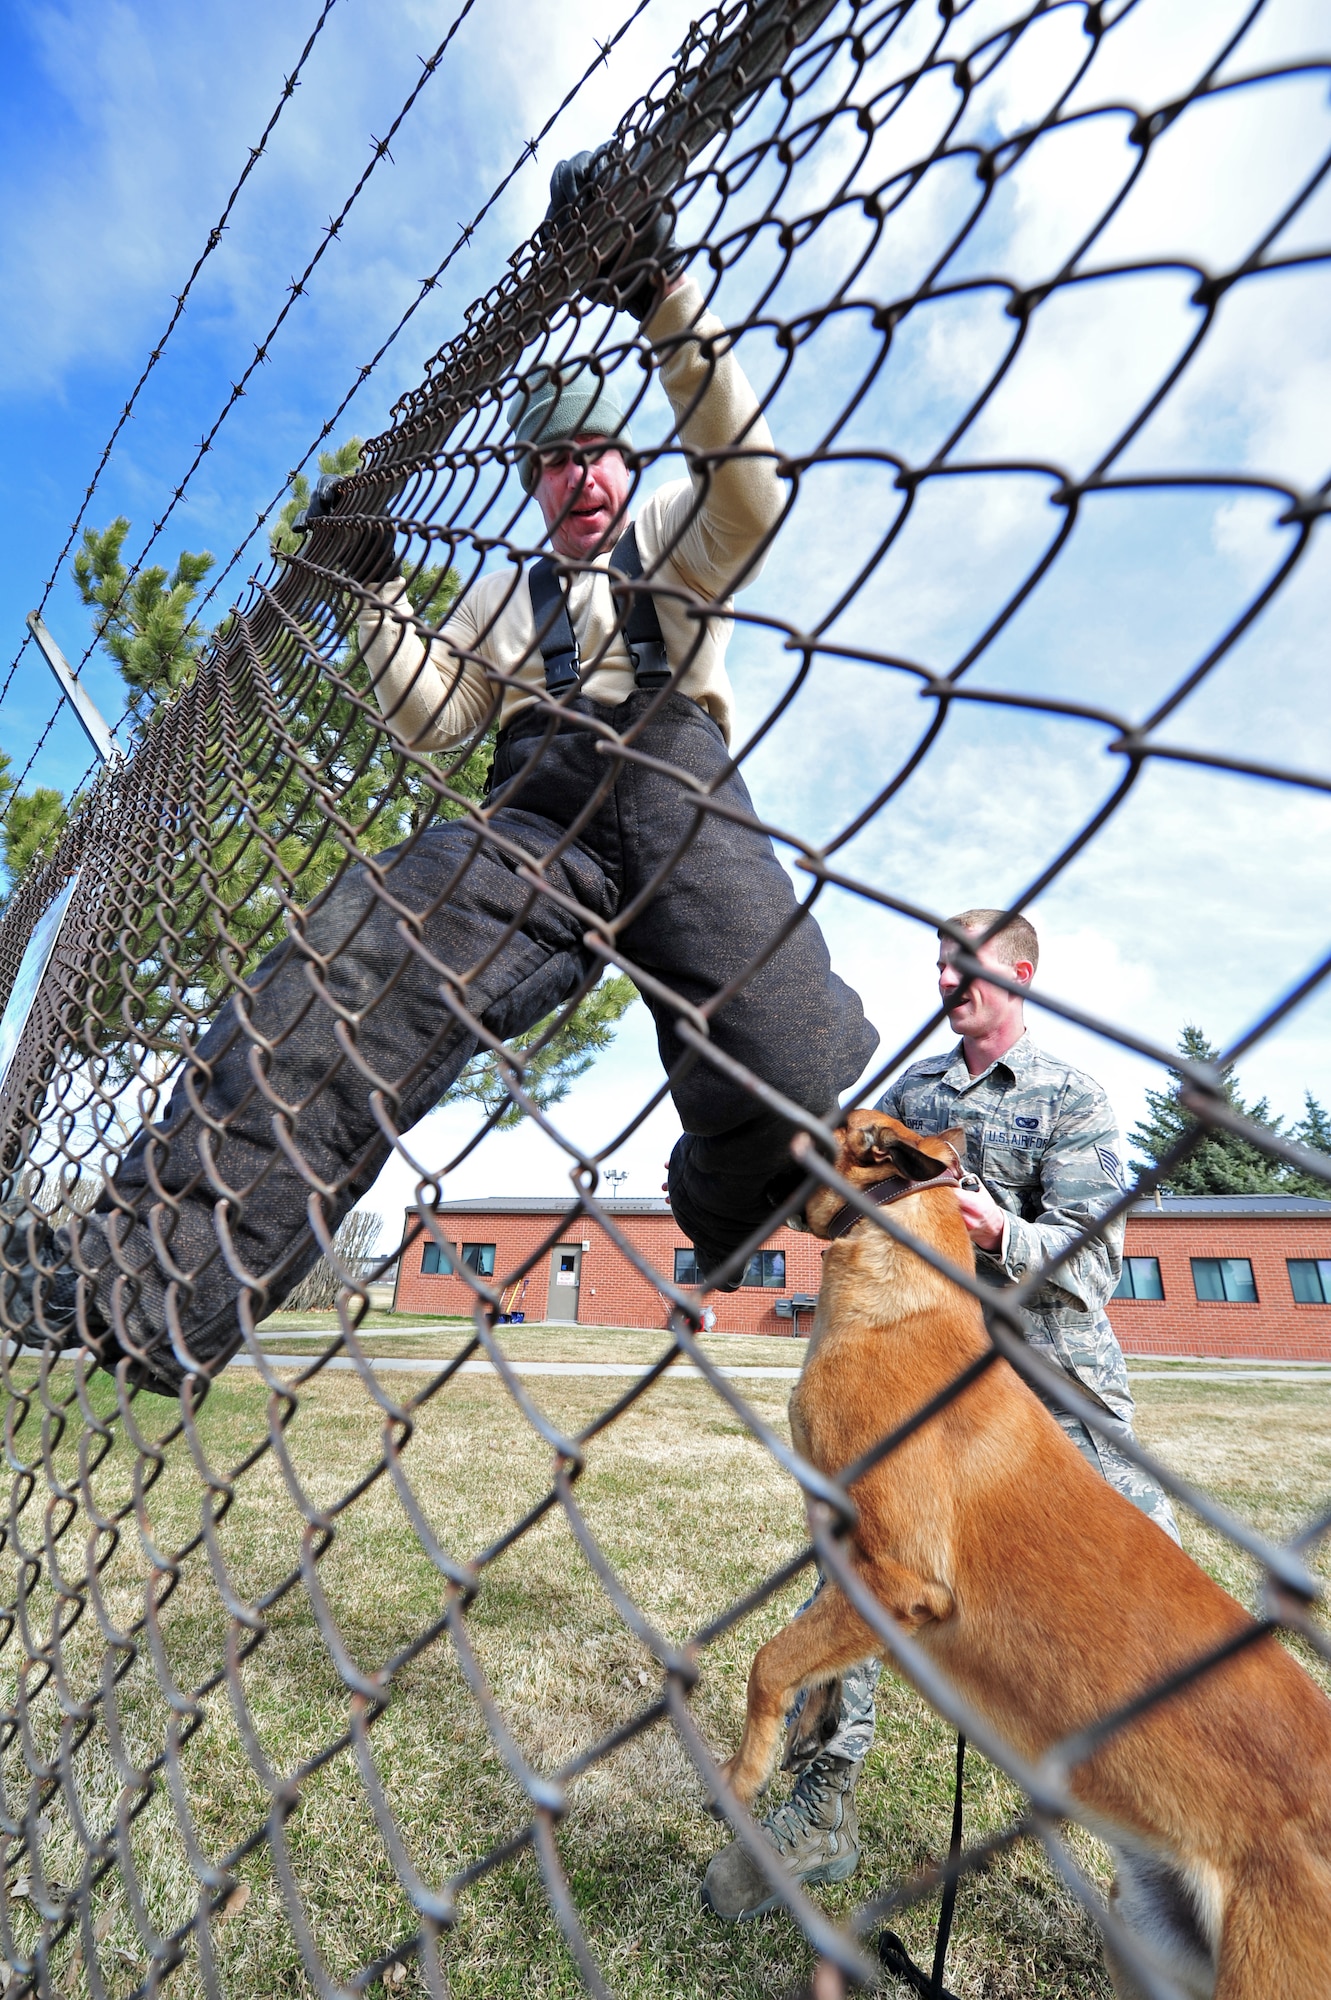 Uutah bites the leg of a simulated aggressor during a training session at the K-9 confidence course at Fairchild Air Force Base, Wash., March 21, 2013. The military working dog is trained to grab an aggressor’s leg if they attempt to climb over fences. Uutah is a Belgian Malinois military working dog assigned to the 92nd Security Forces Squadron. (U.S. Air Force photo by Senior Airman Taylor Curry)